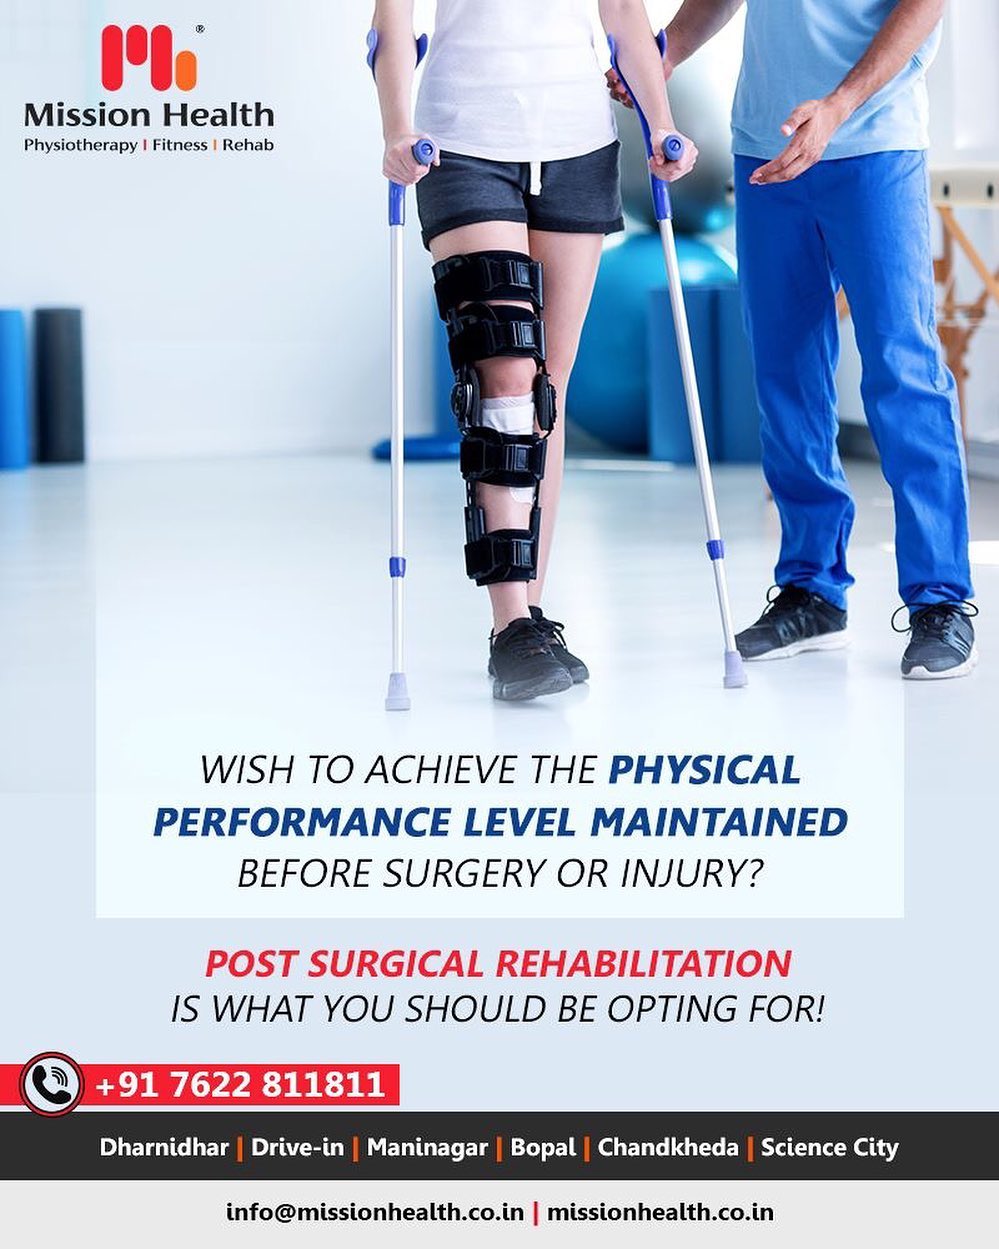 Don’t miss Post-Surgical Rehabilitation after your surgery. It’s very crucial for your optimal functional recovery. Without it, surgery may not yield expected outcomes.

#PostSurgicalRehabilitation #MissionHealth #MissionHealthIndia #MovementIsLife